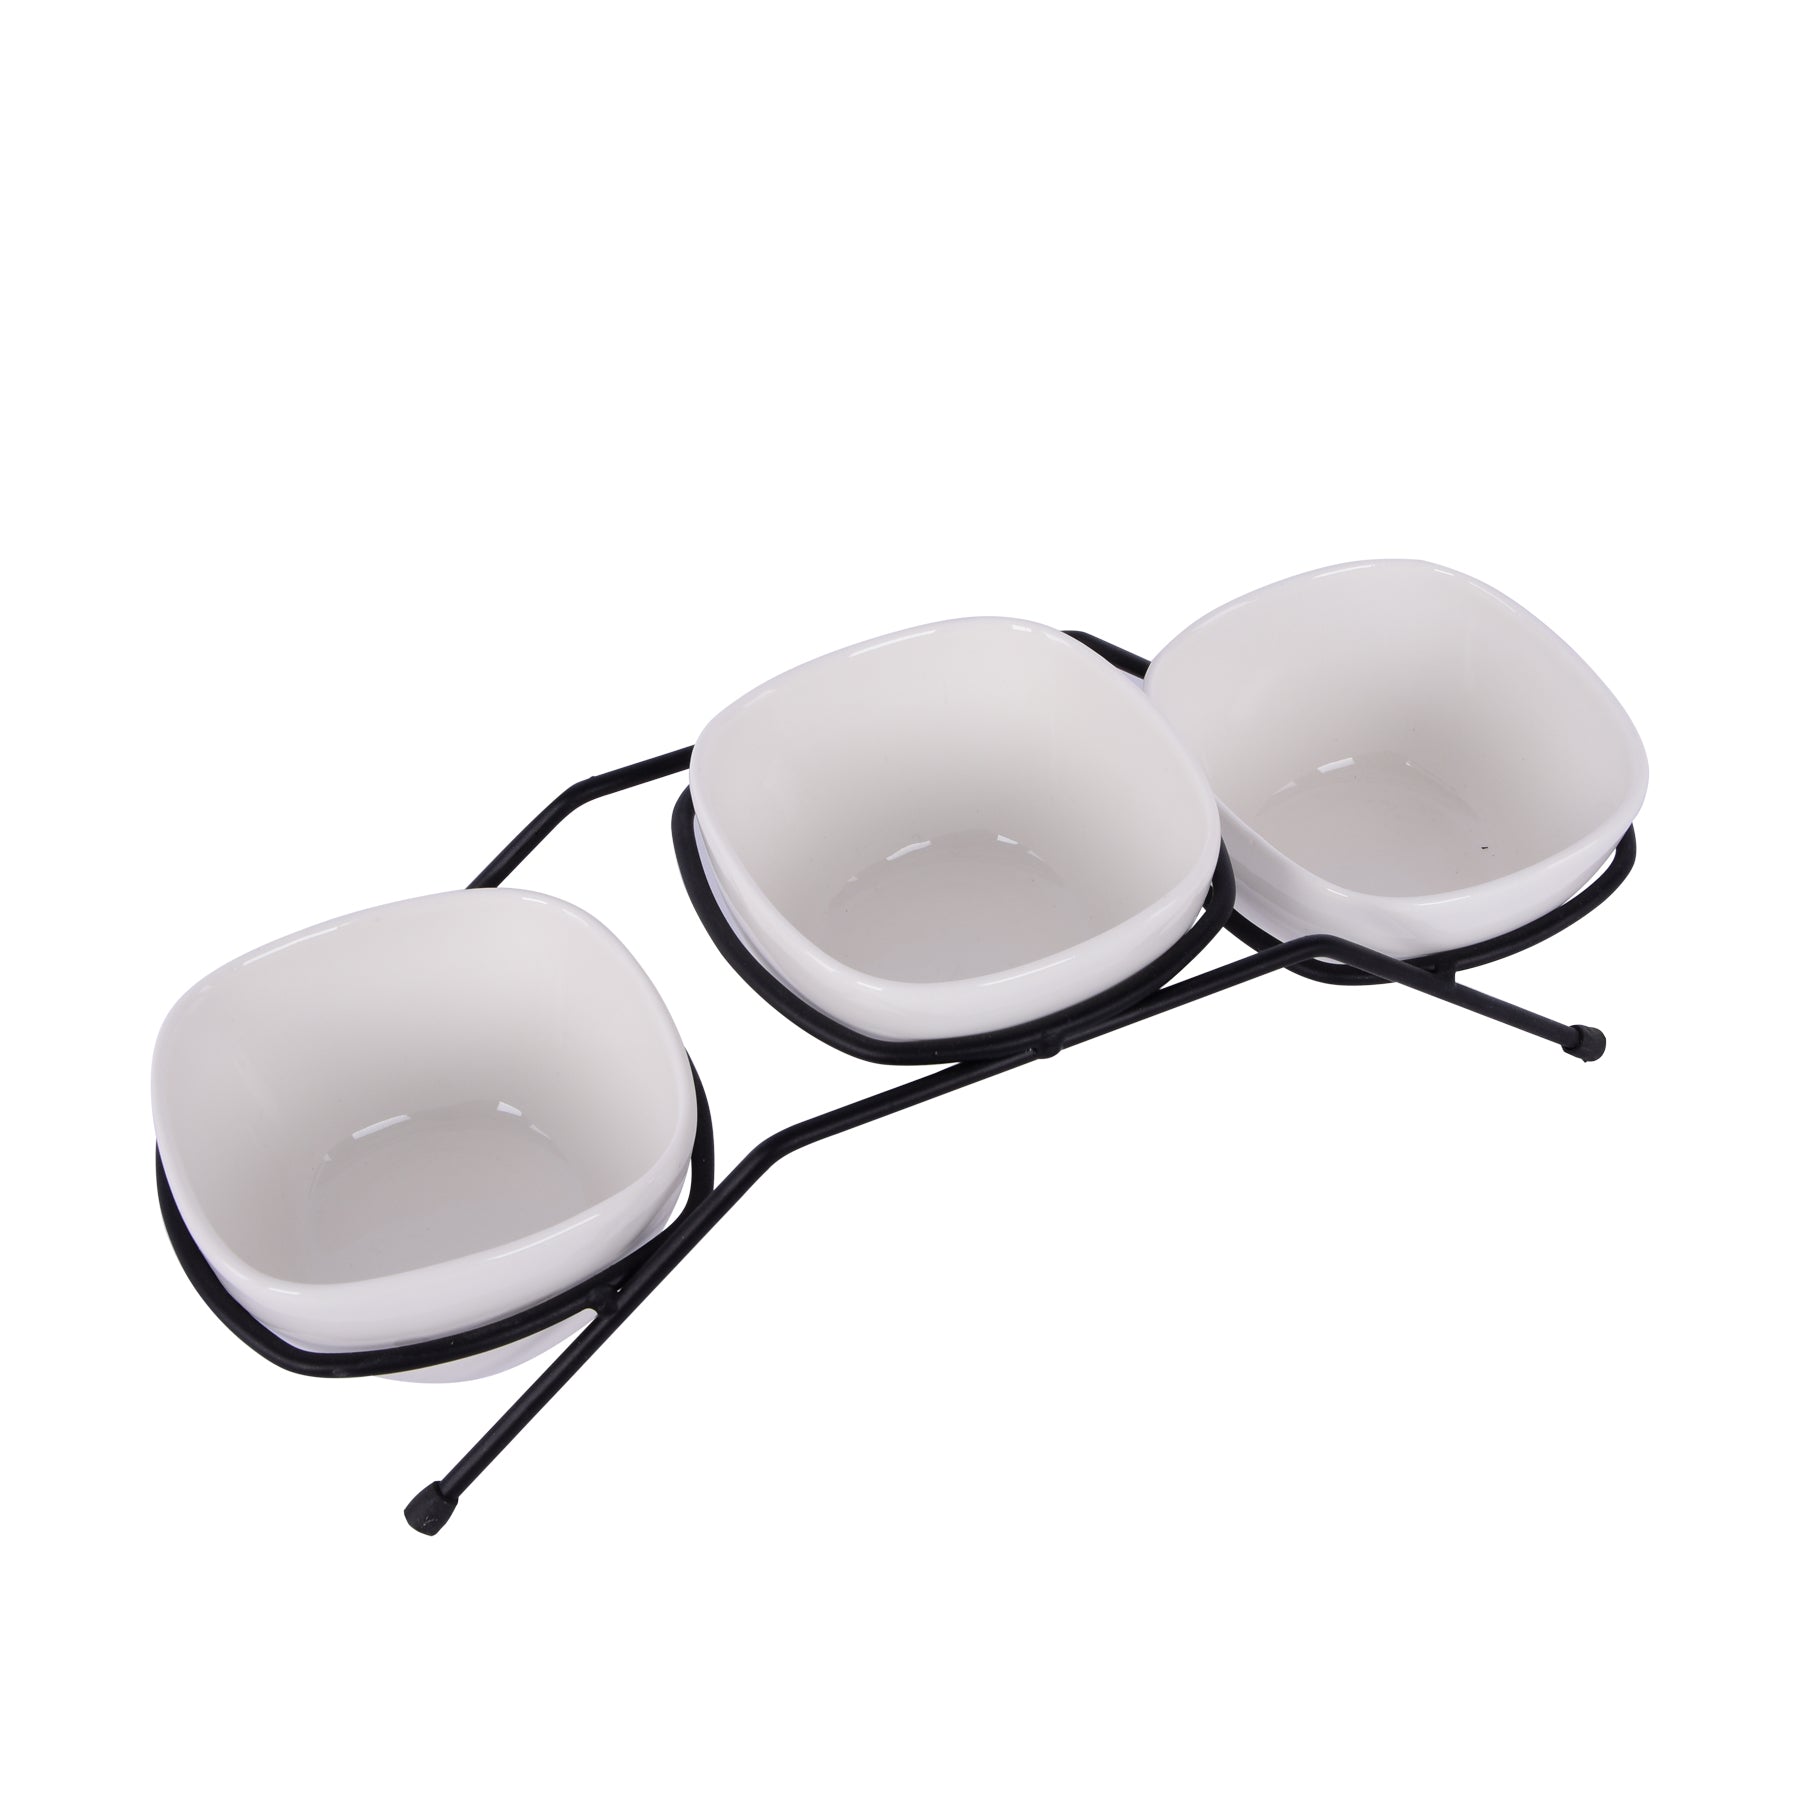 3 Pcs Round Bowl with stand, White